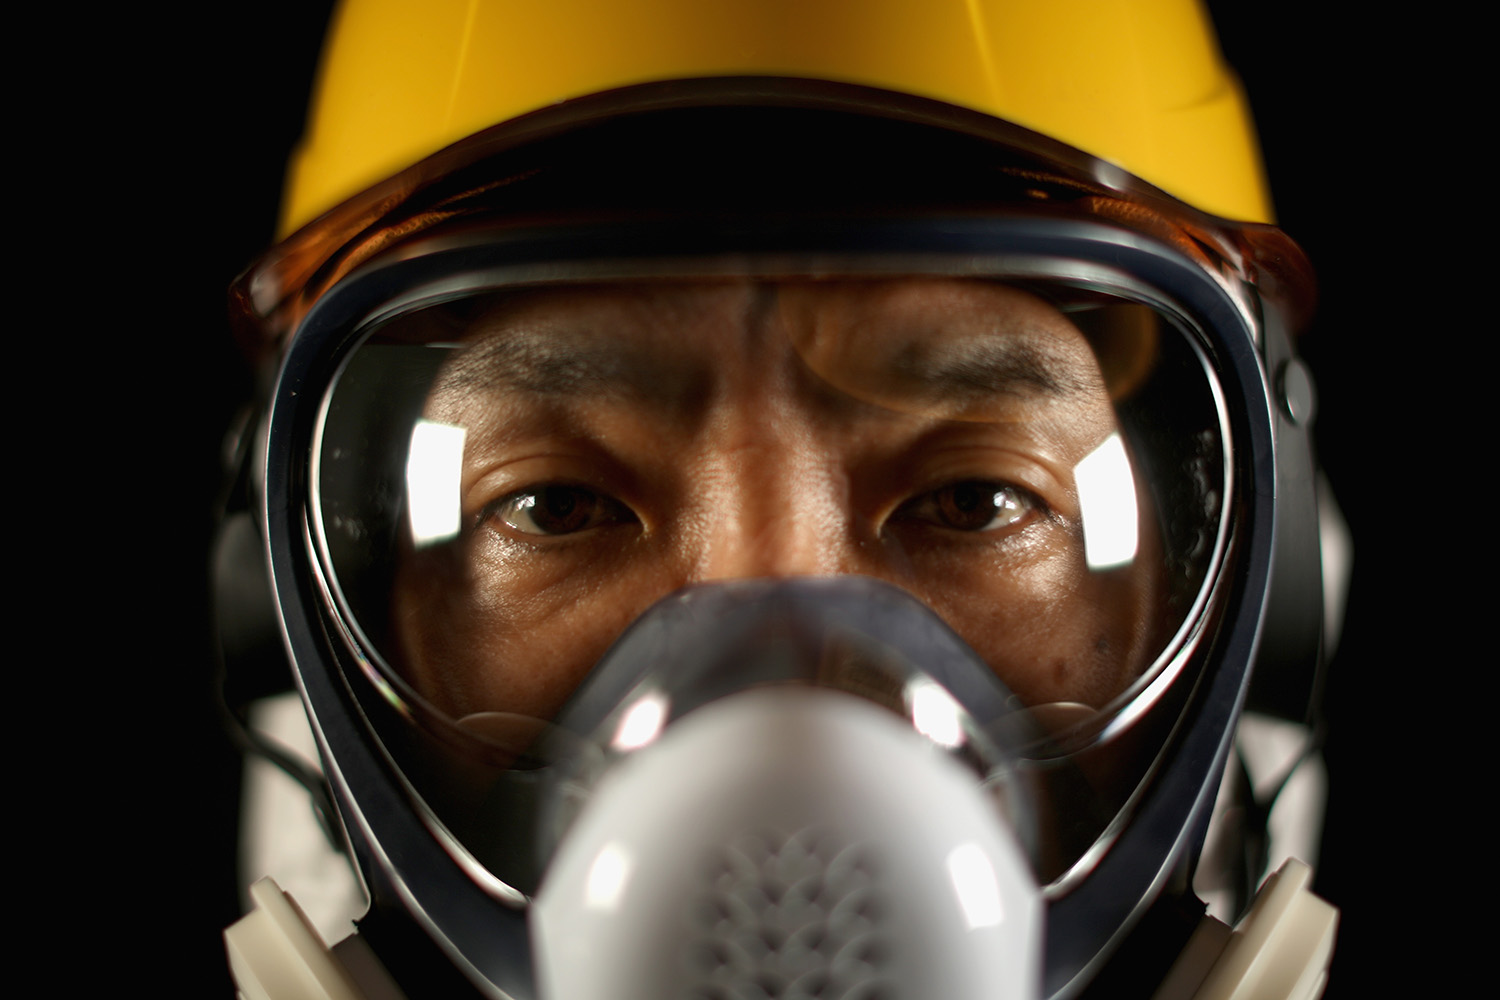 Fukushima Workers Don Their Protective Gear In These Eerie Portraits From The Exclusion Zone